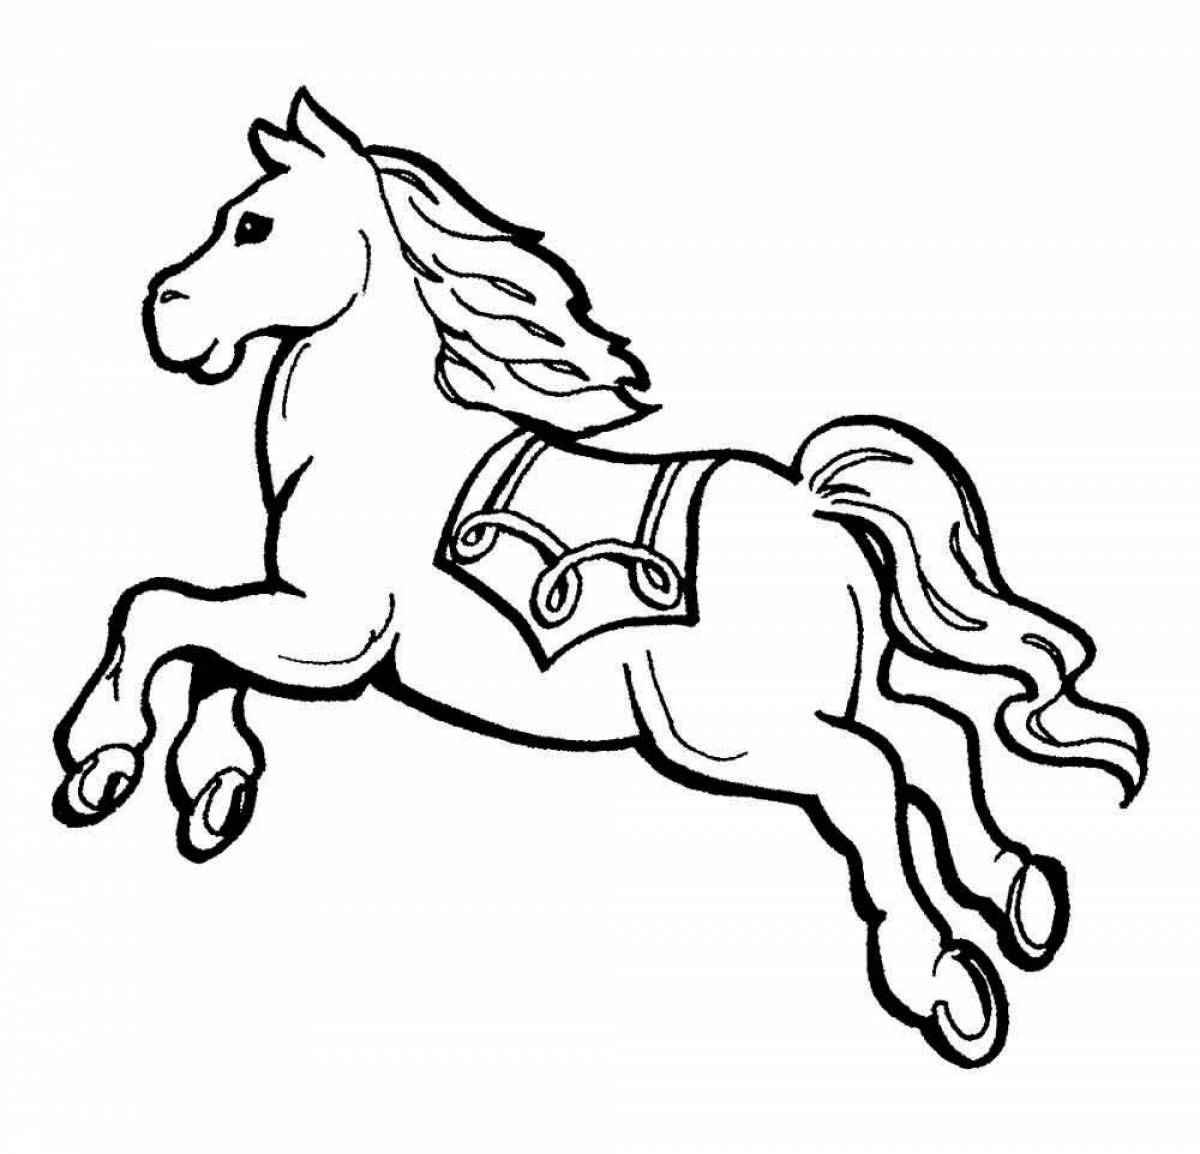 Colorful horse coloring page for 3-4 year olds